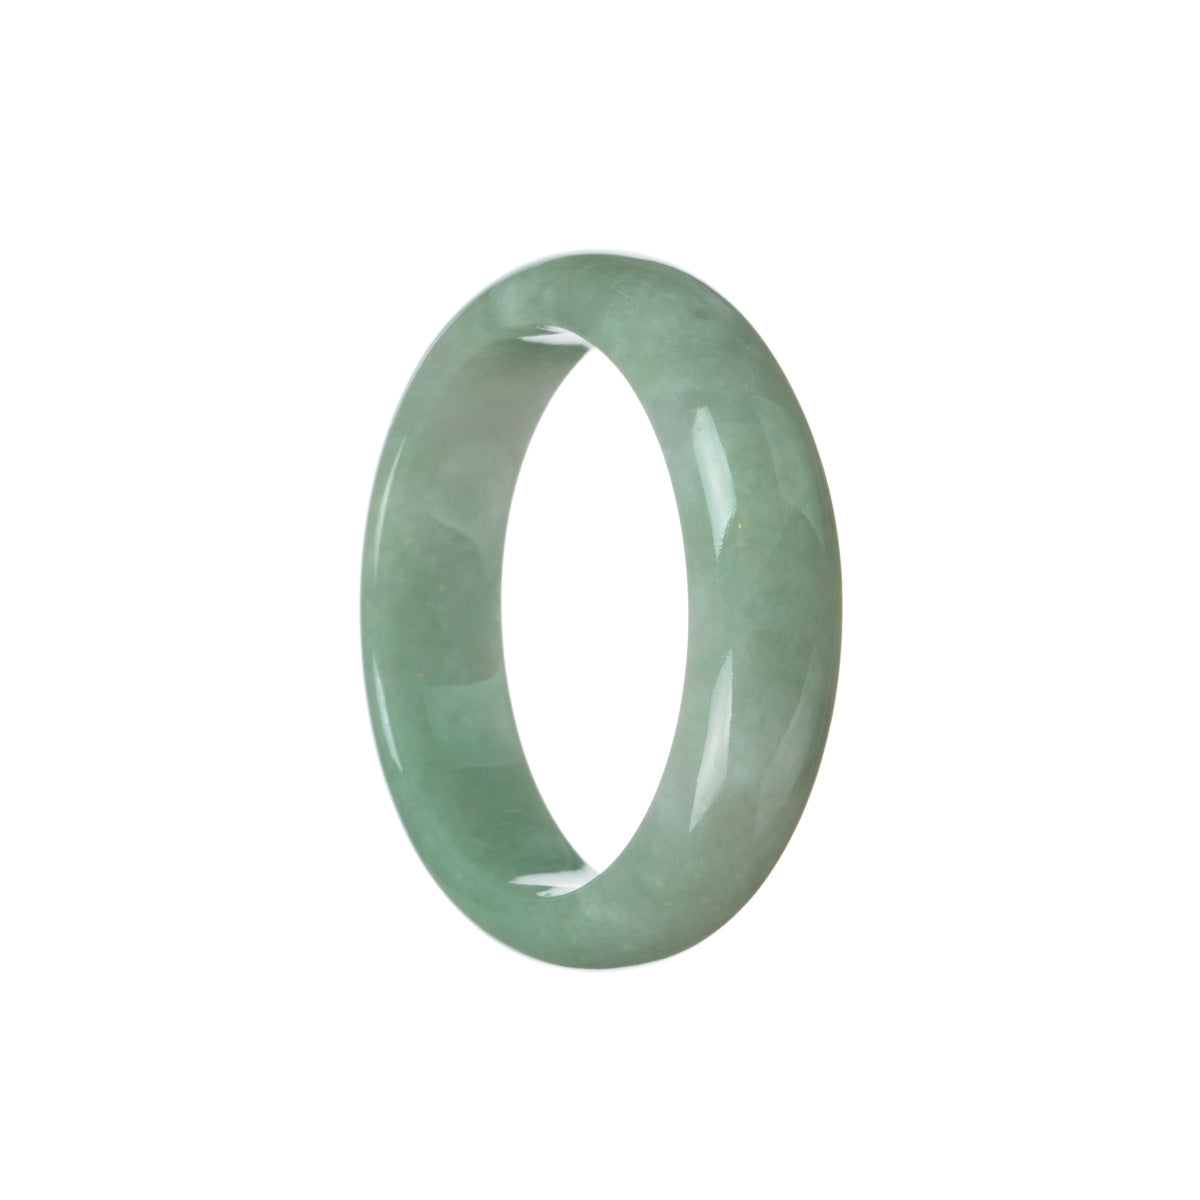 A beautiful light green jade bangle bracelet with a half moon design, made from high-quality A-grade traditional jade. Perfect for adding a touch of elegance to any outfit.